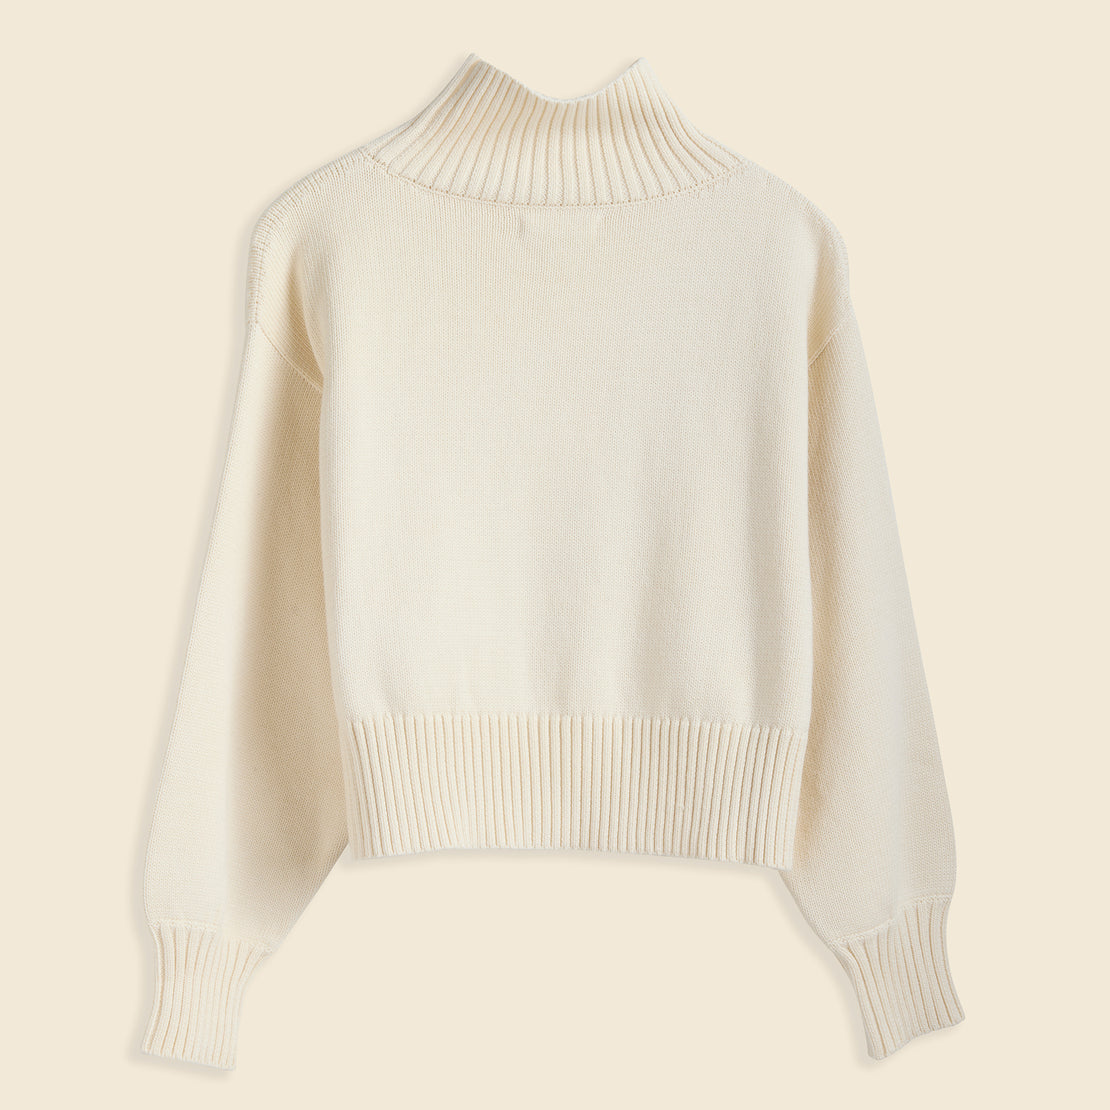 Crop Turtleneck - Ivory - First Rite - STAG Provisions - W - Tops - Sweater